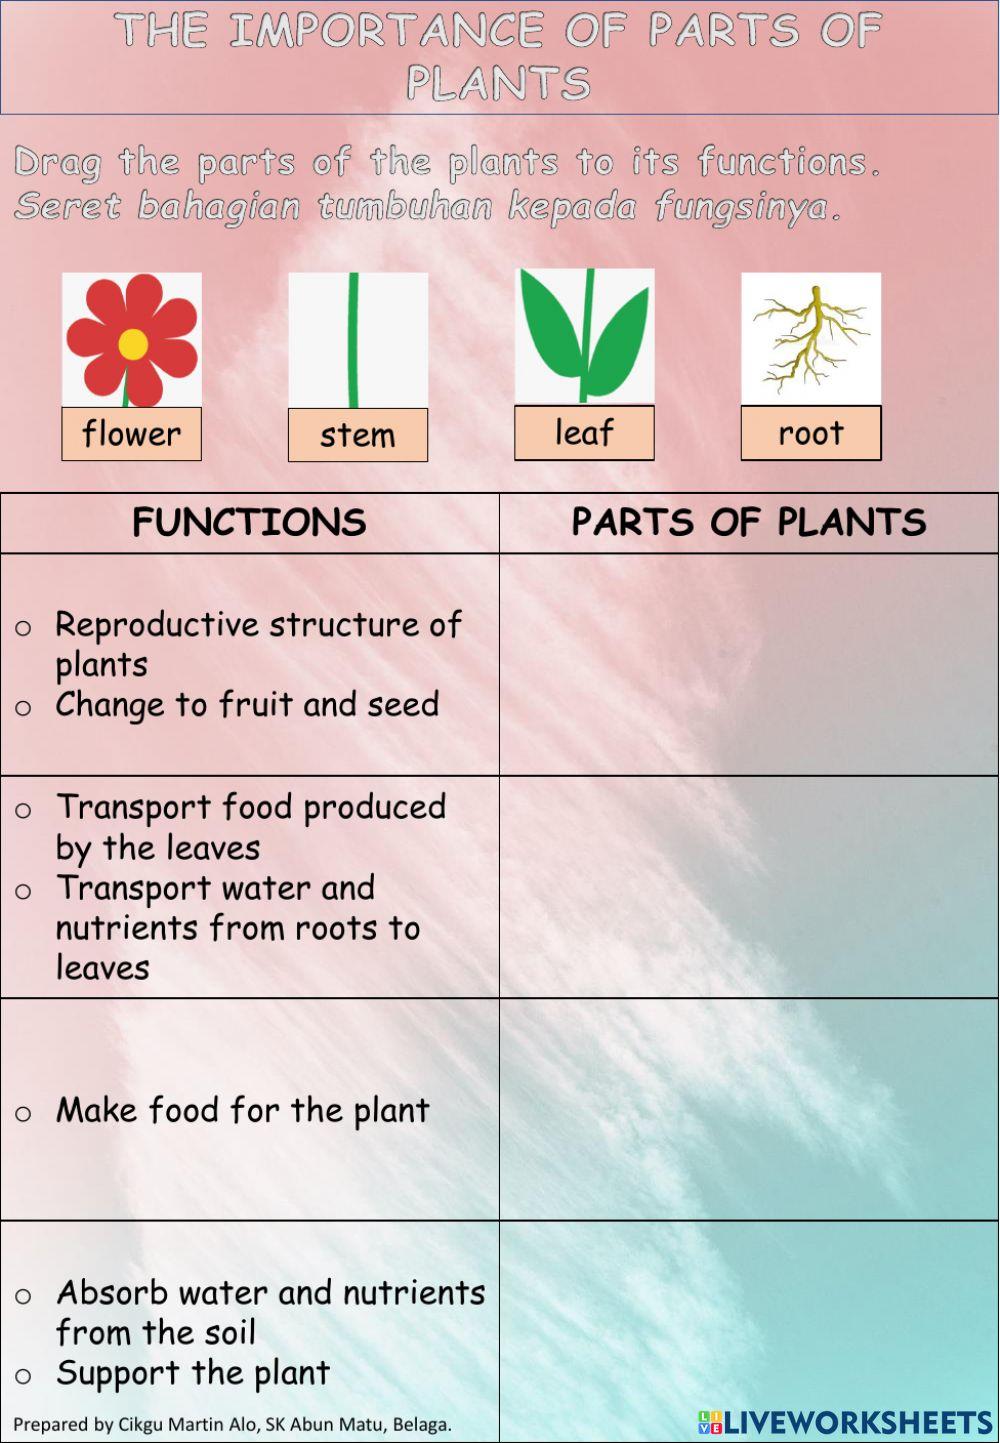 The Importance of Parts of Plants